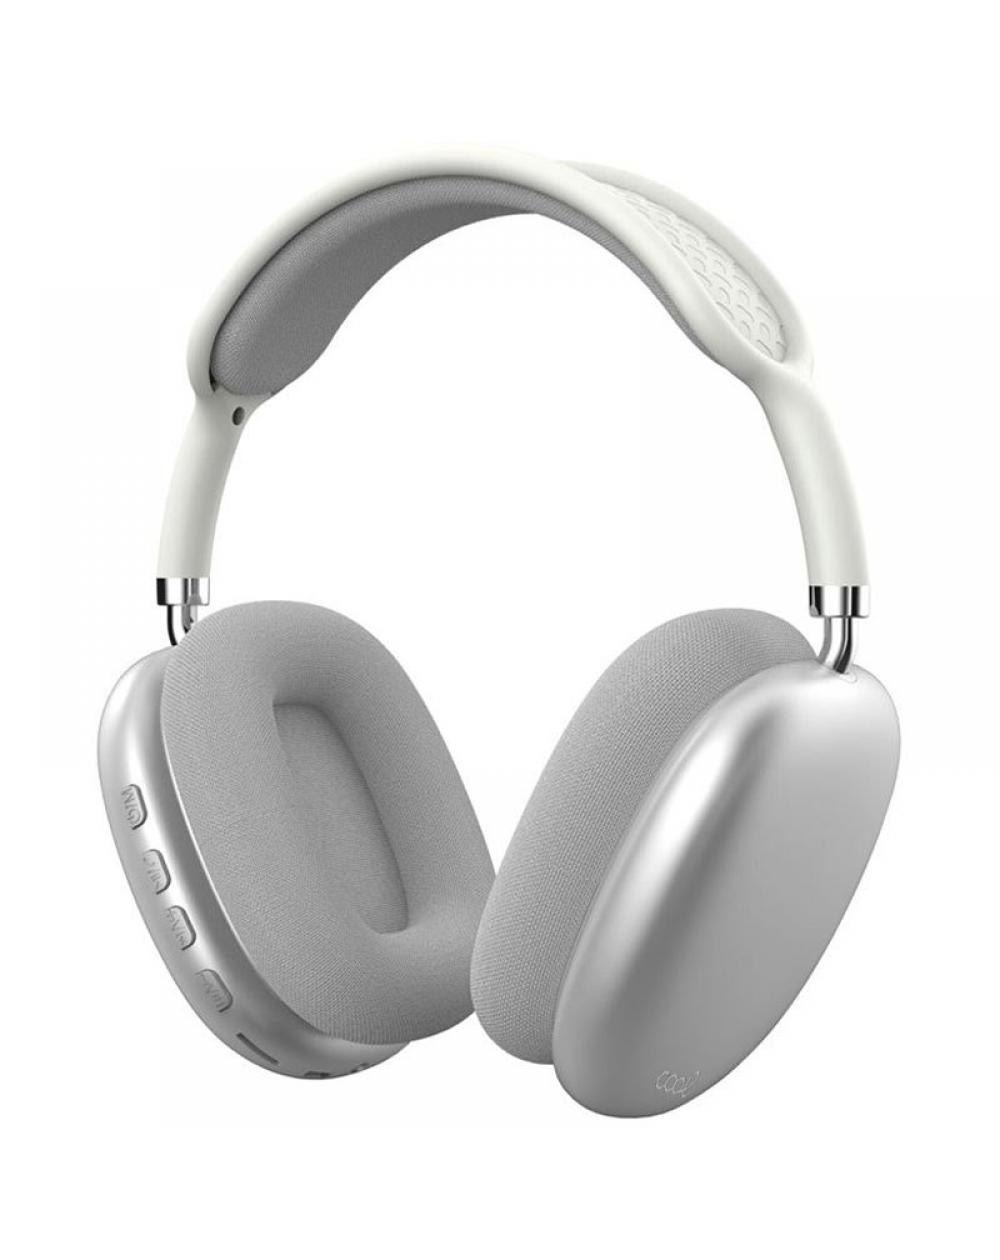 Auriculares Stereo Bluetooth Cascos COOL Active Max Blanco-Plata